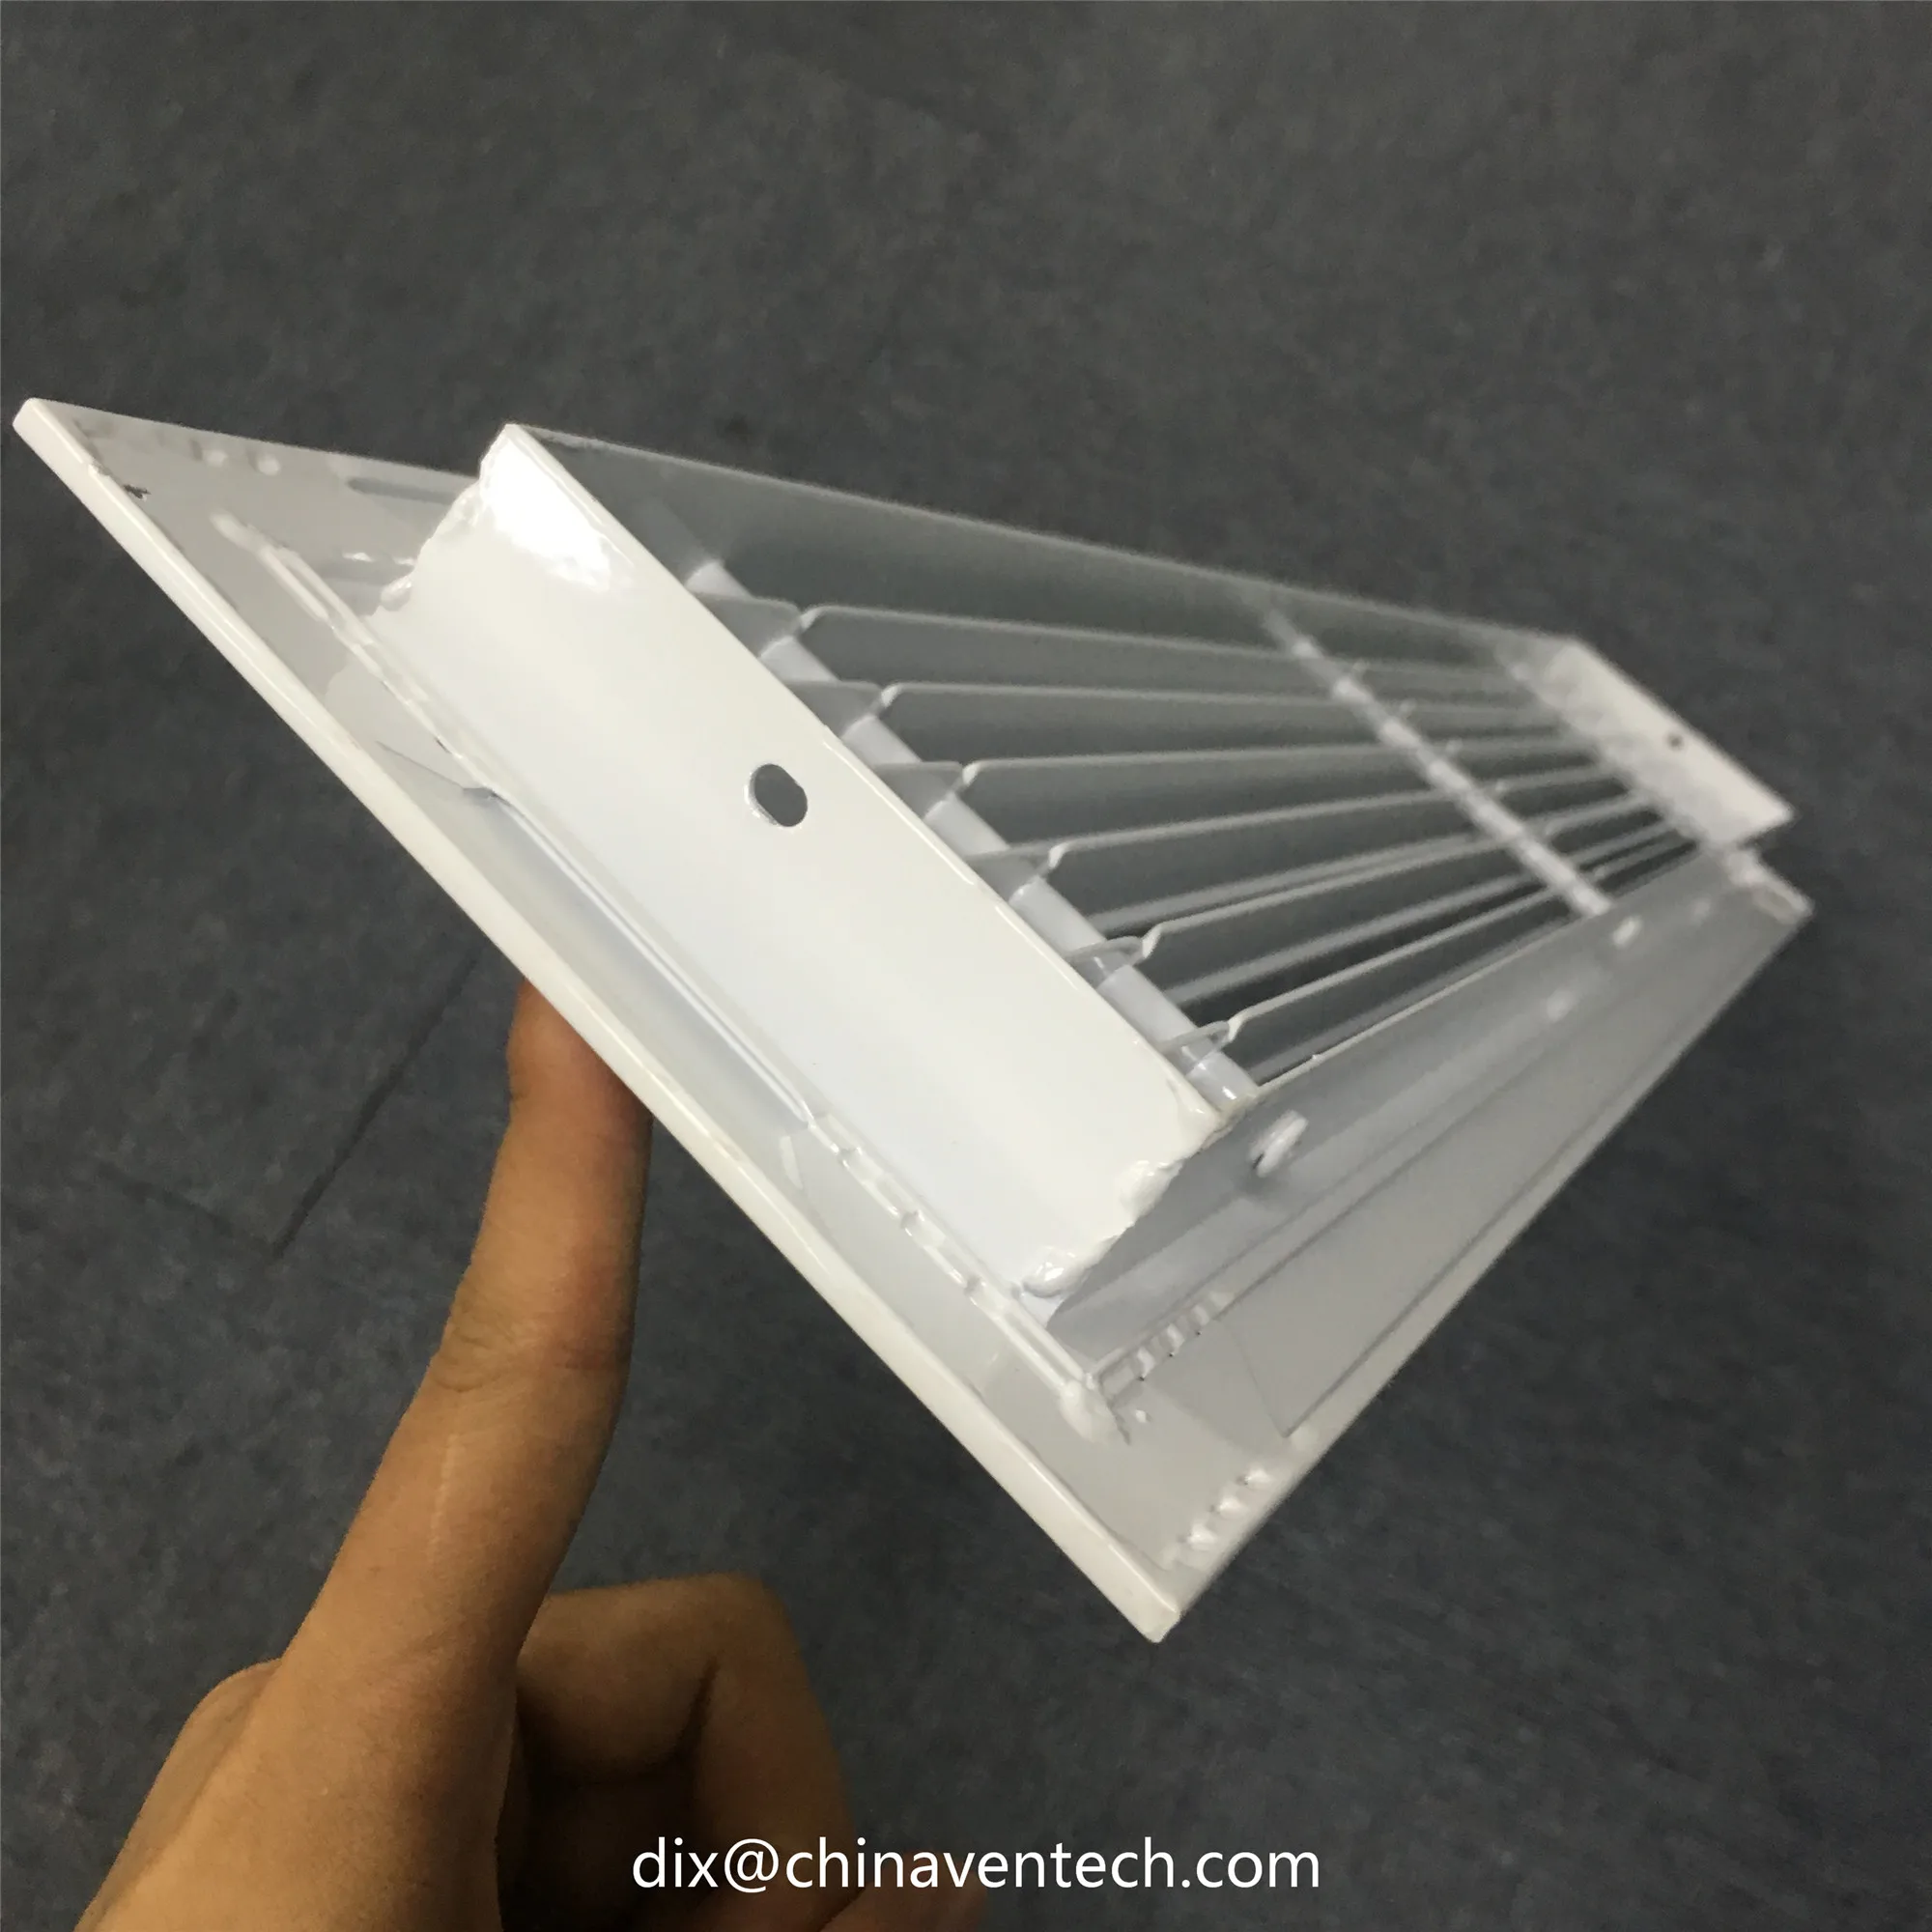 Hvac Architectural Sidewall Bar Grilles & Registers with Removable Core